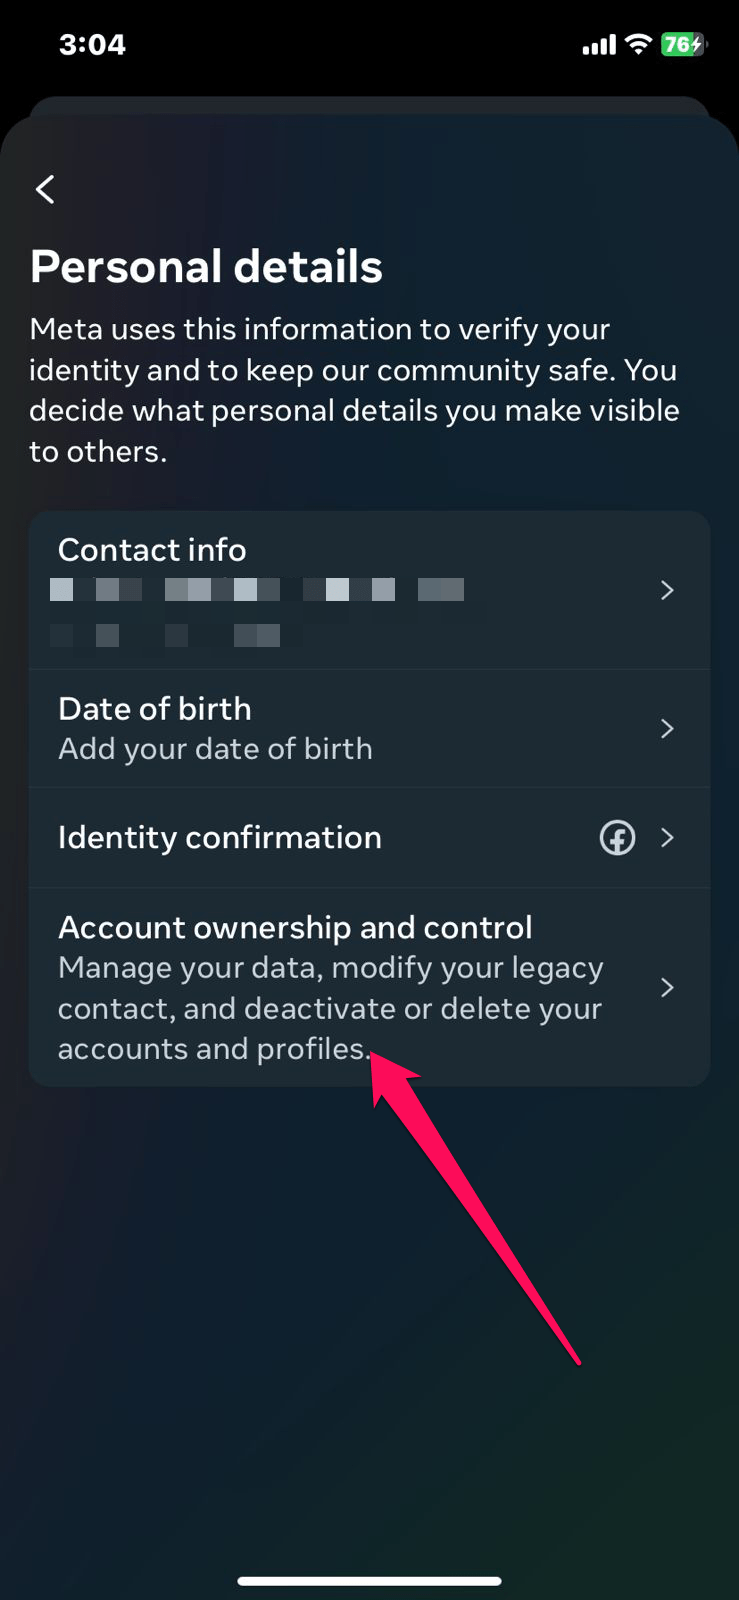 account-ownership-and-control